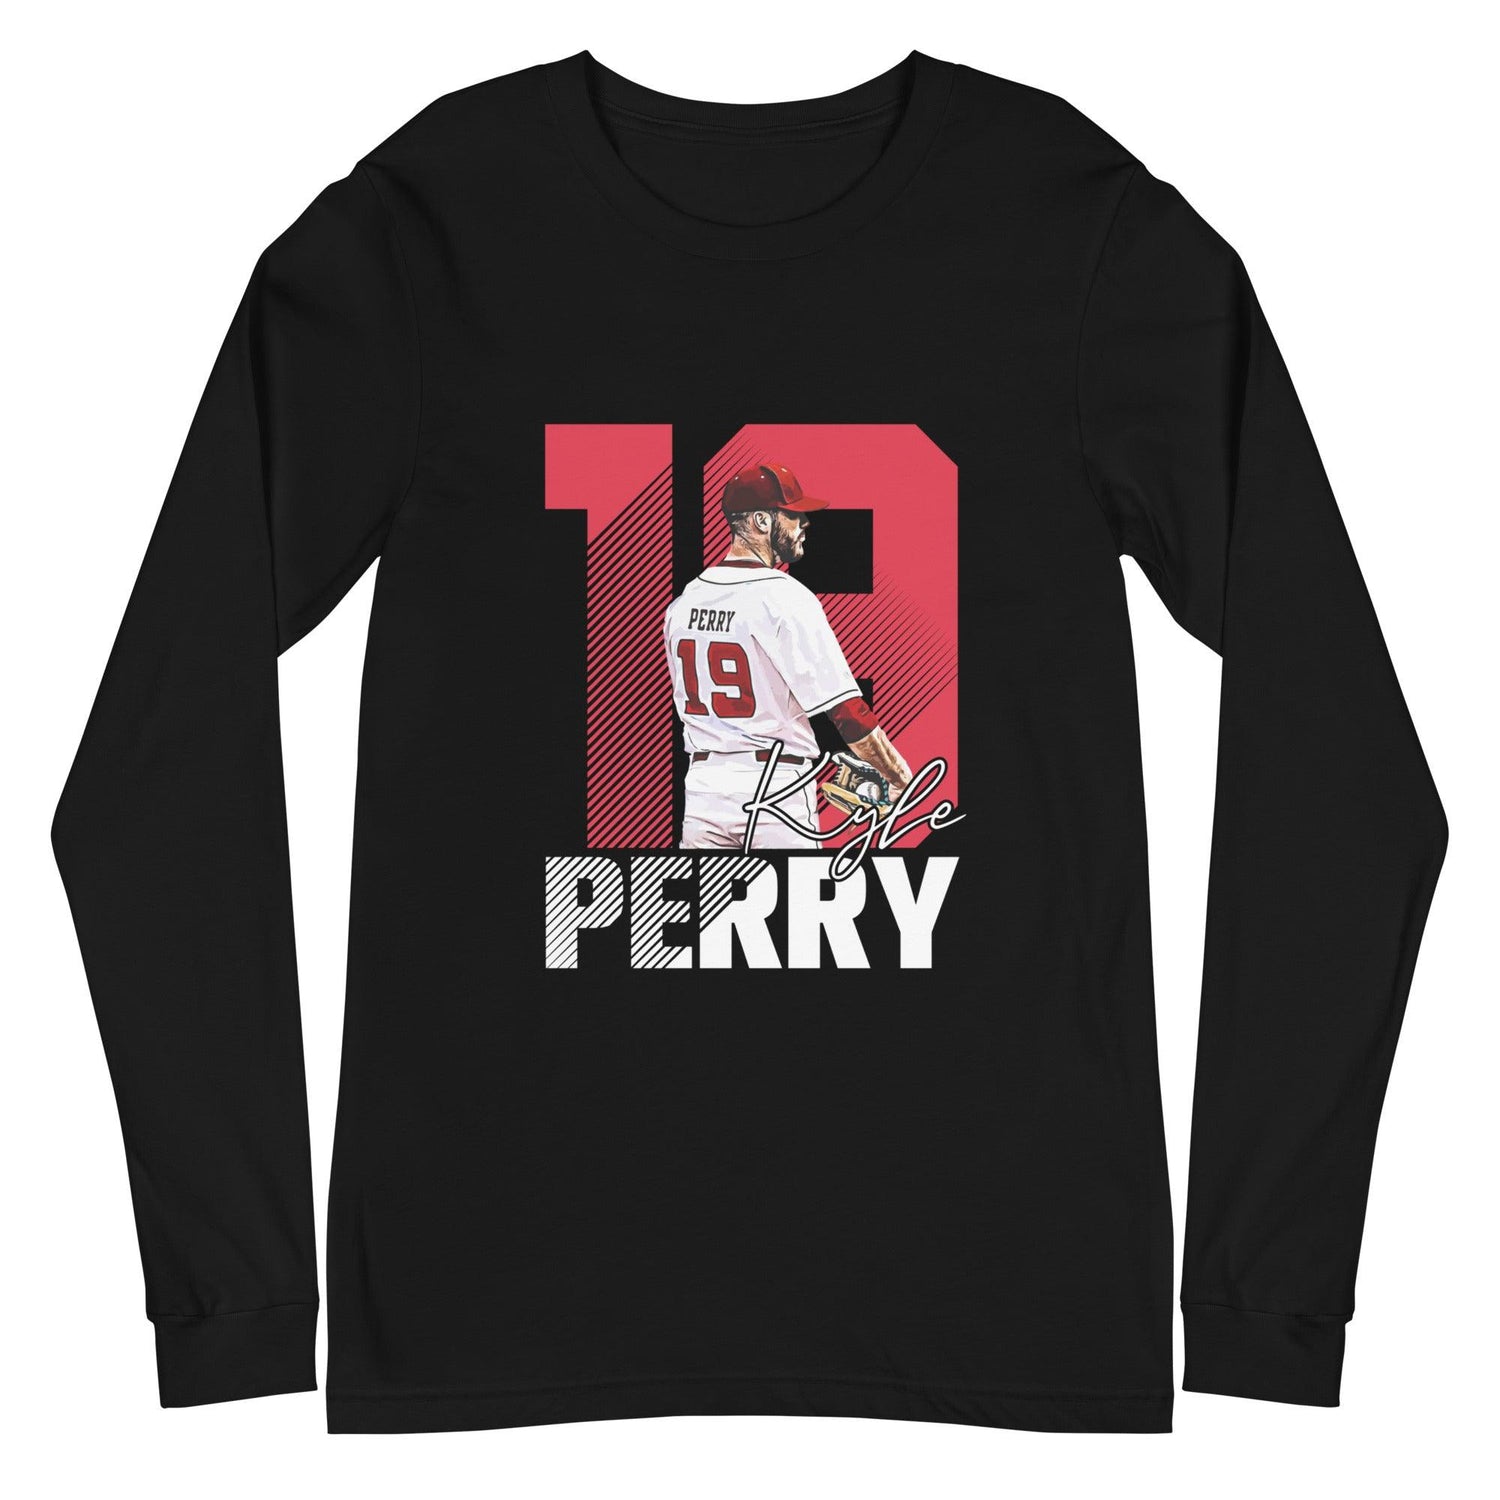 Kyle Perry "Gameday" Long Sleeve Tee - Fan Arch